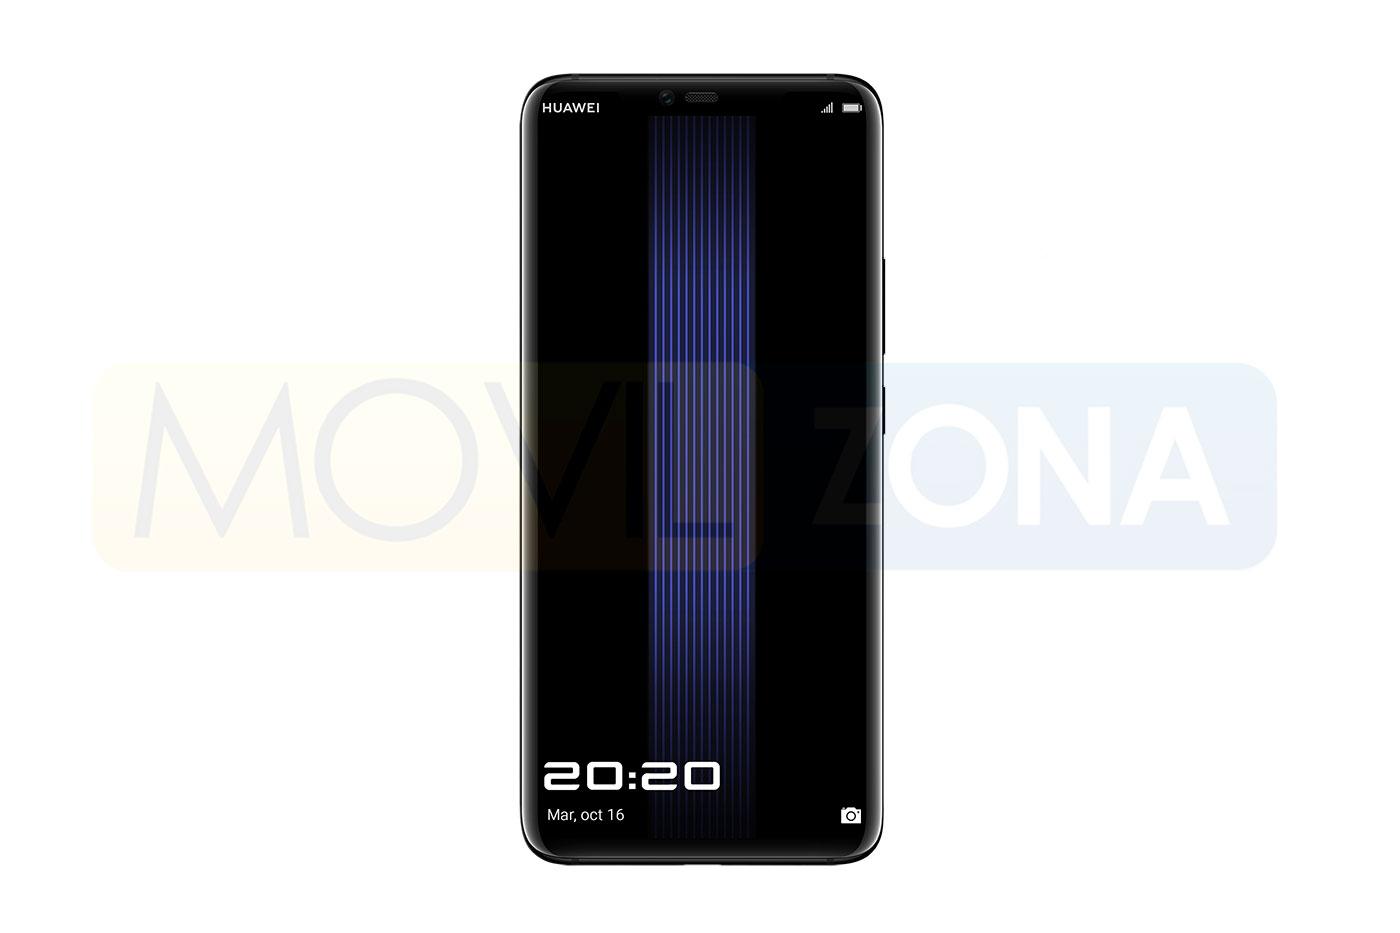 Huawei Mate 20 Porsche Design RS Android